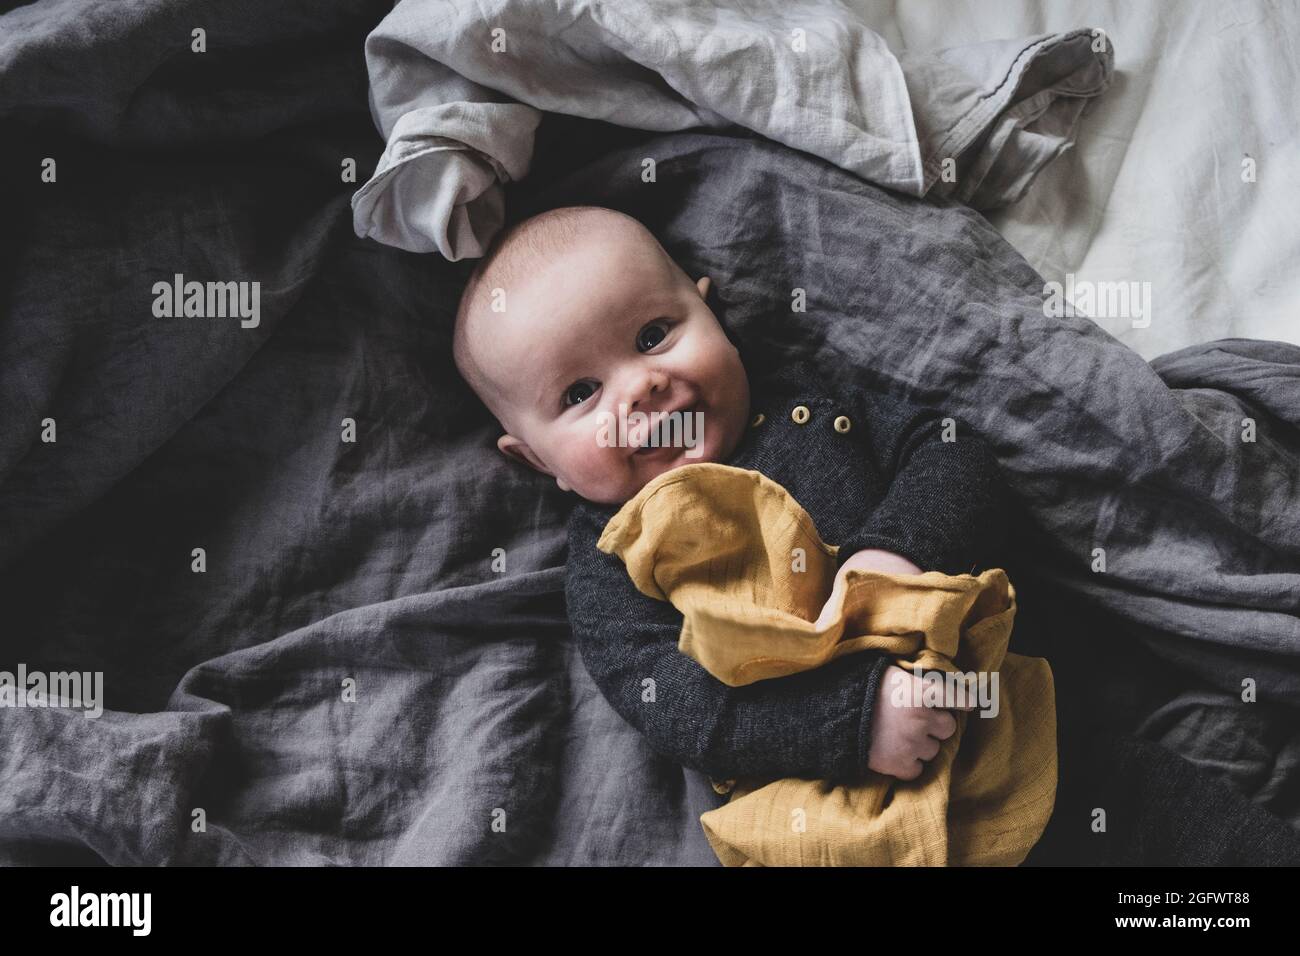 High angle view of baby lying on bed Stock Photo